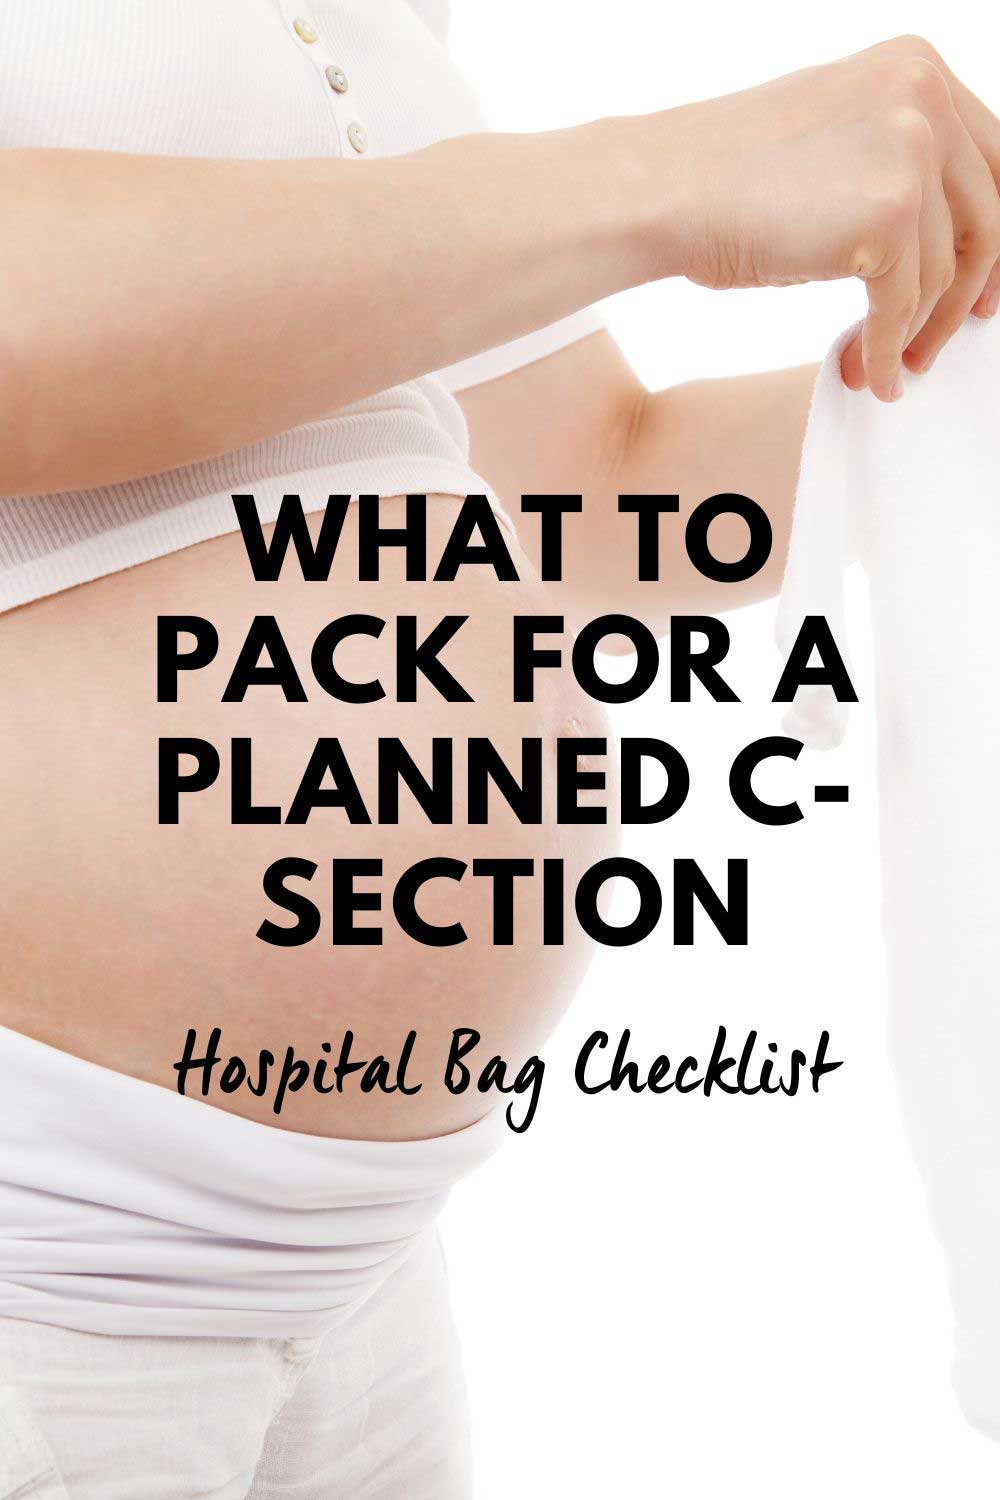 hospital bag checklist: what to pack for a planned c-section